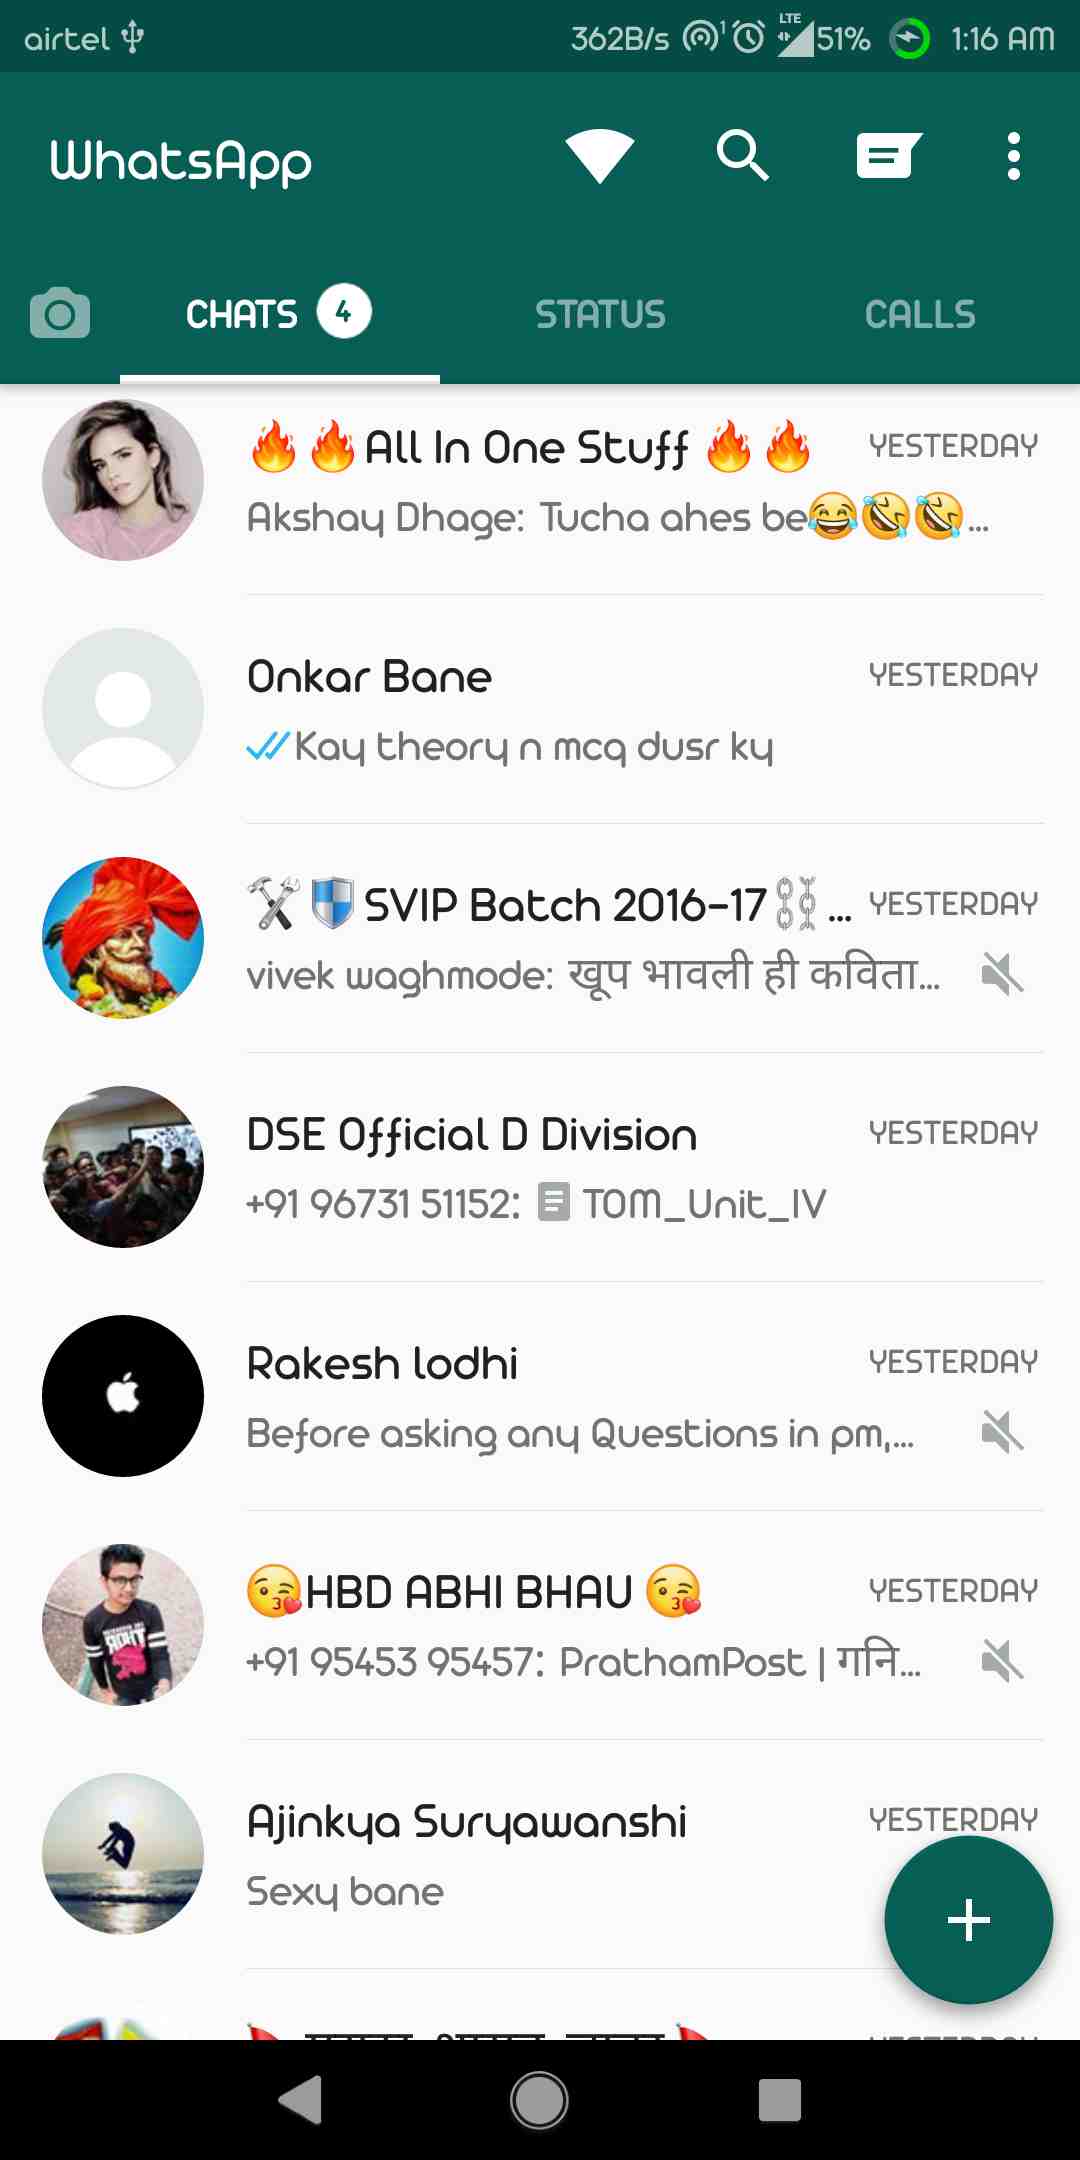 Latest GBWhatsApp 6.60 MOD APK For Android With New Features